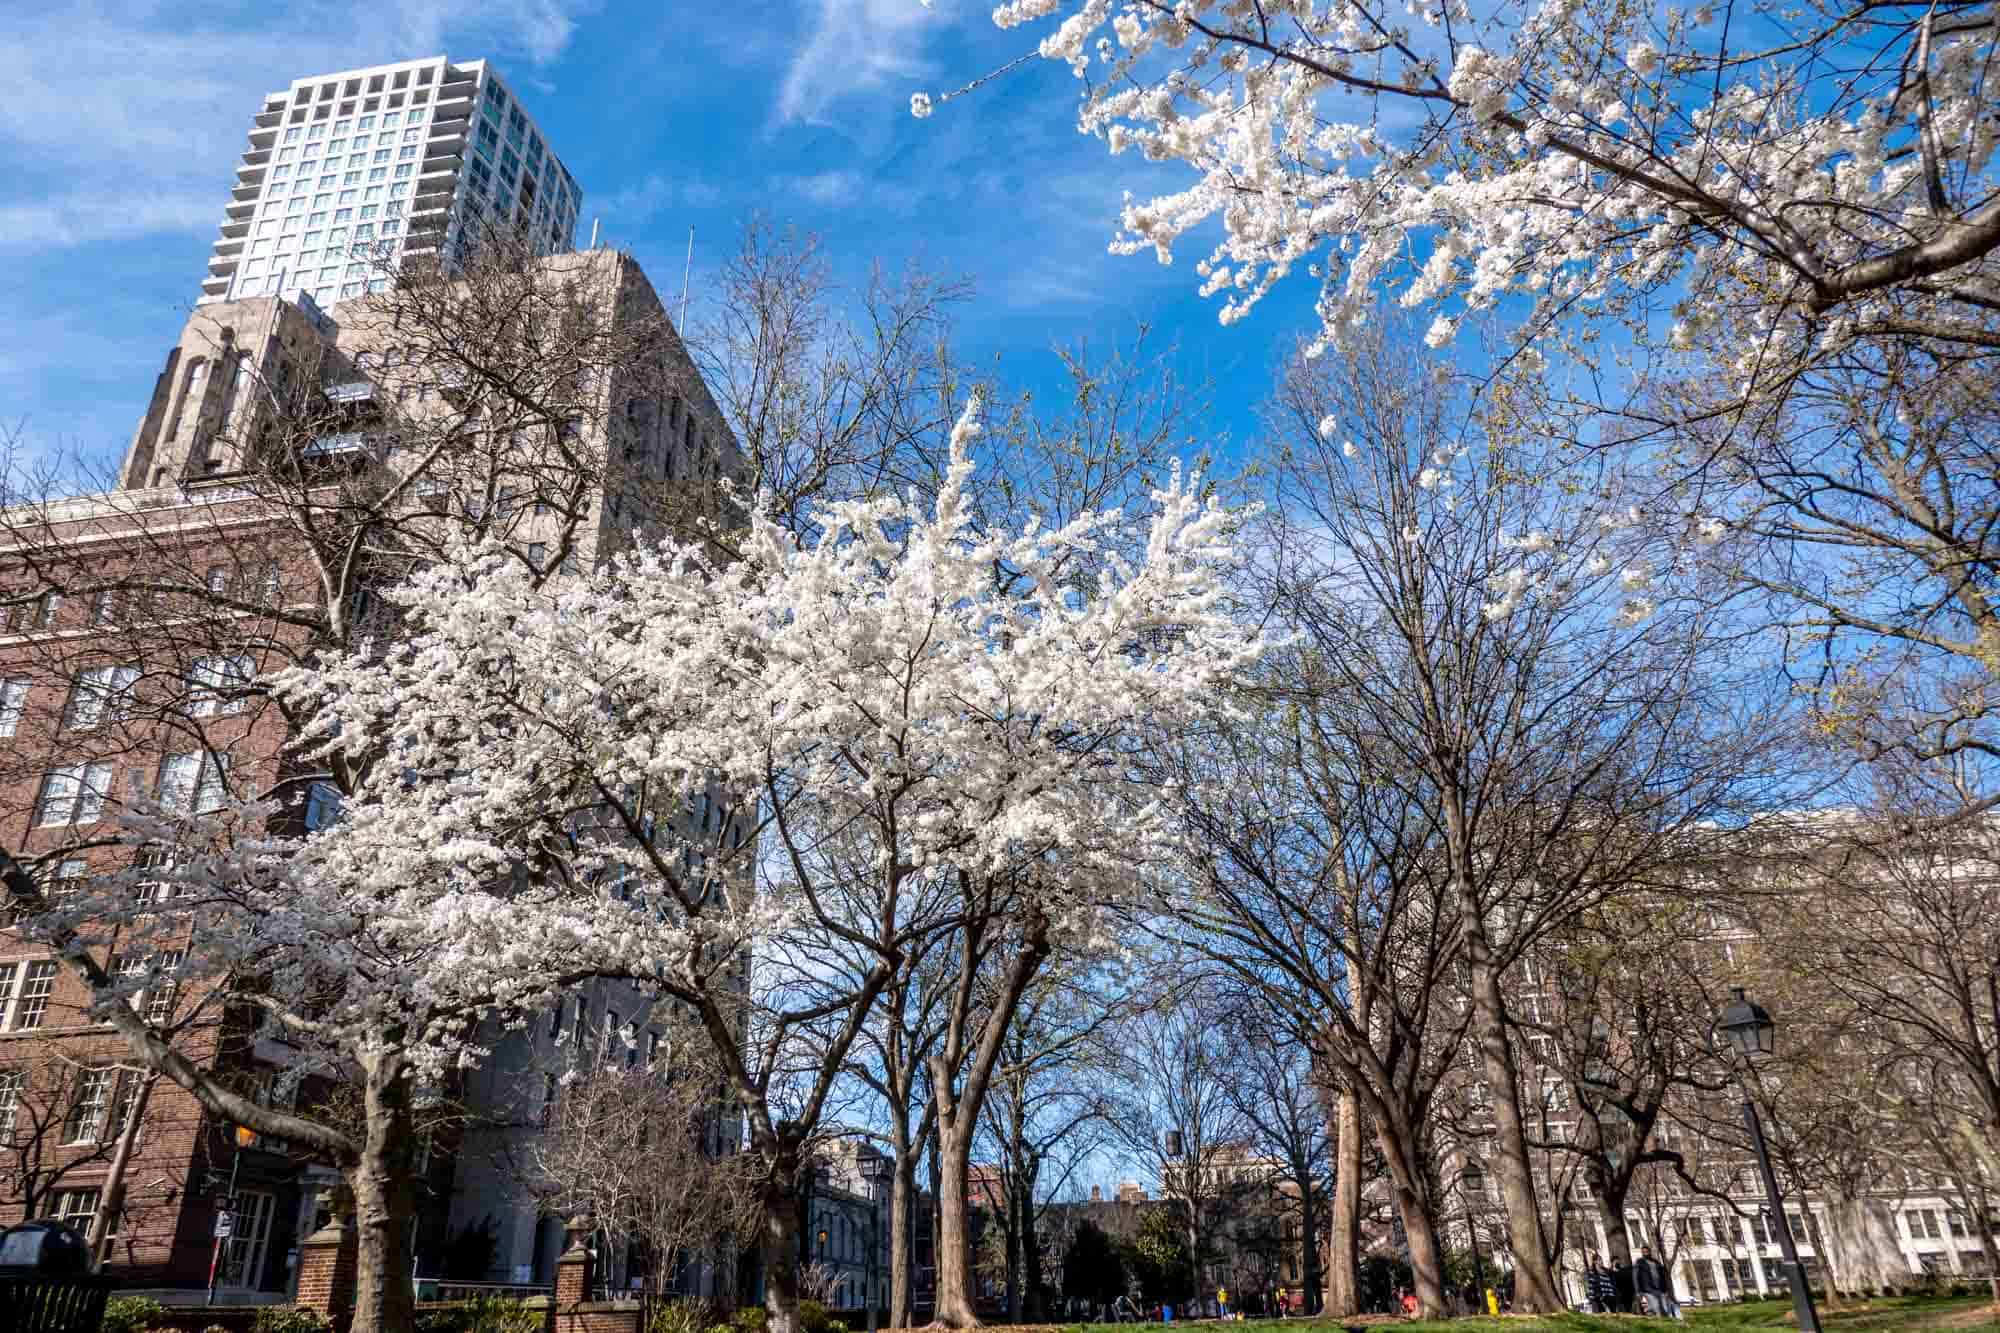 White cherry blossom trees in a park surrounded by tall buildings 